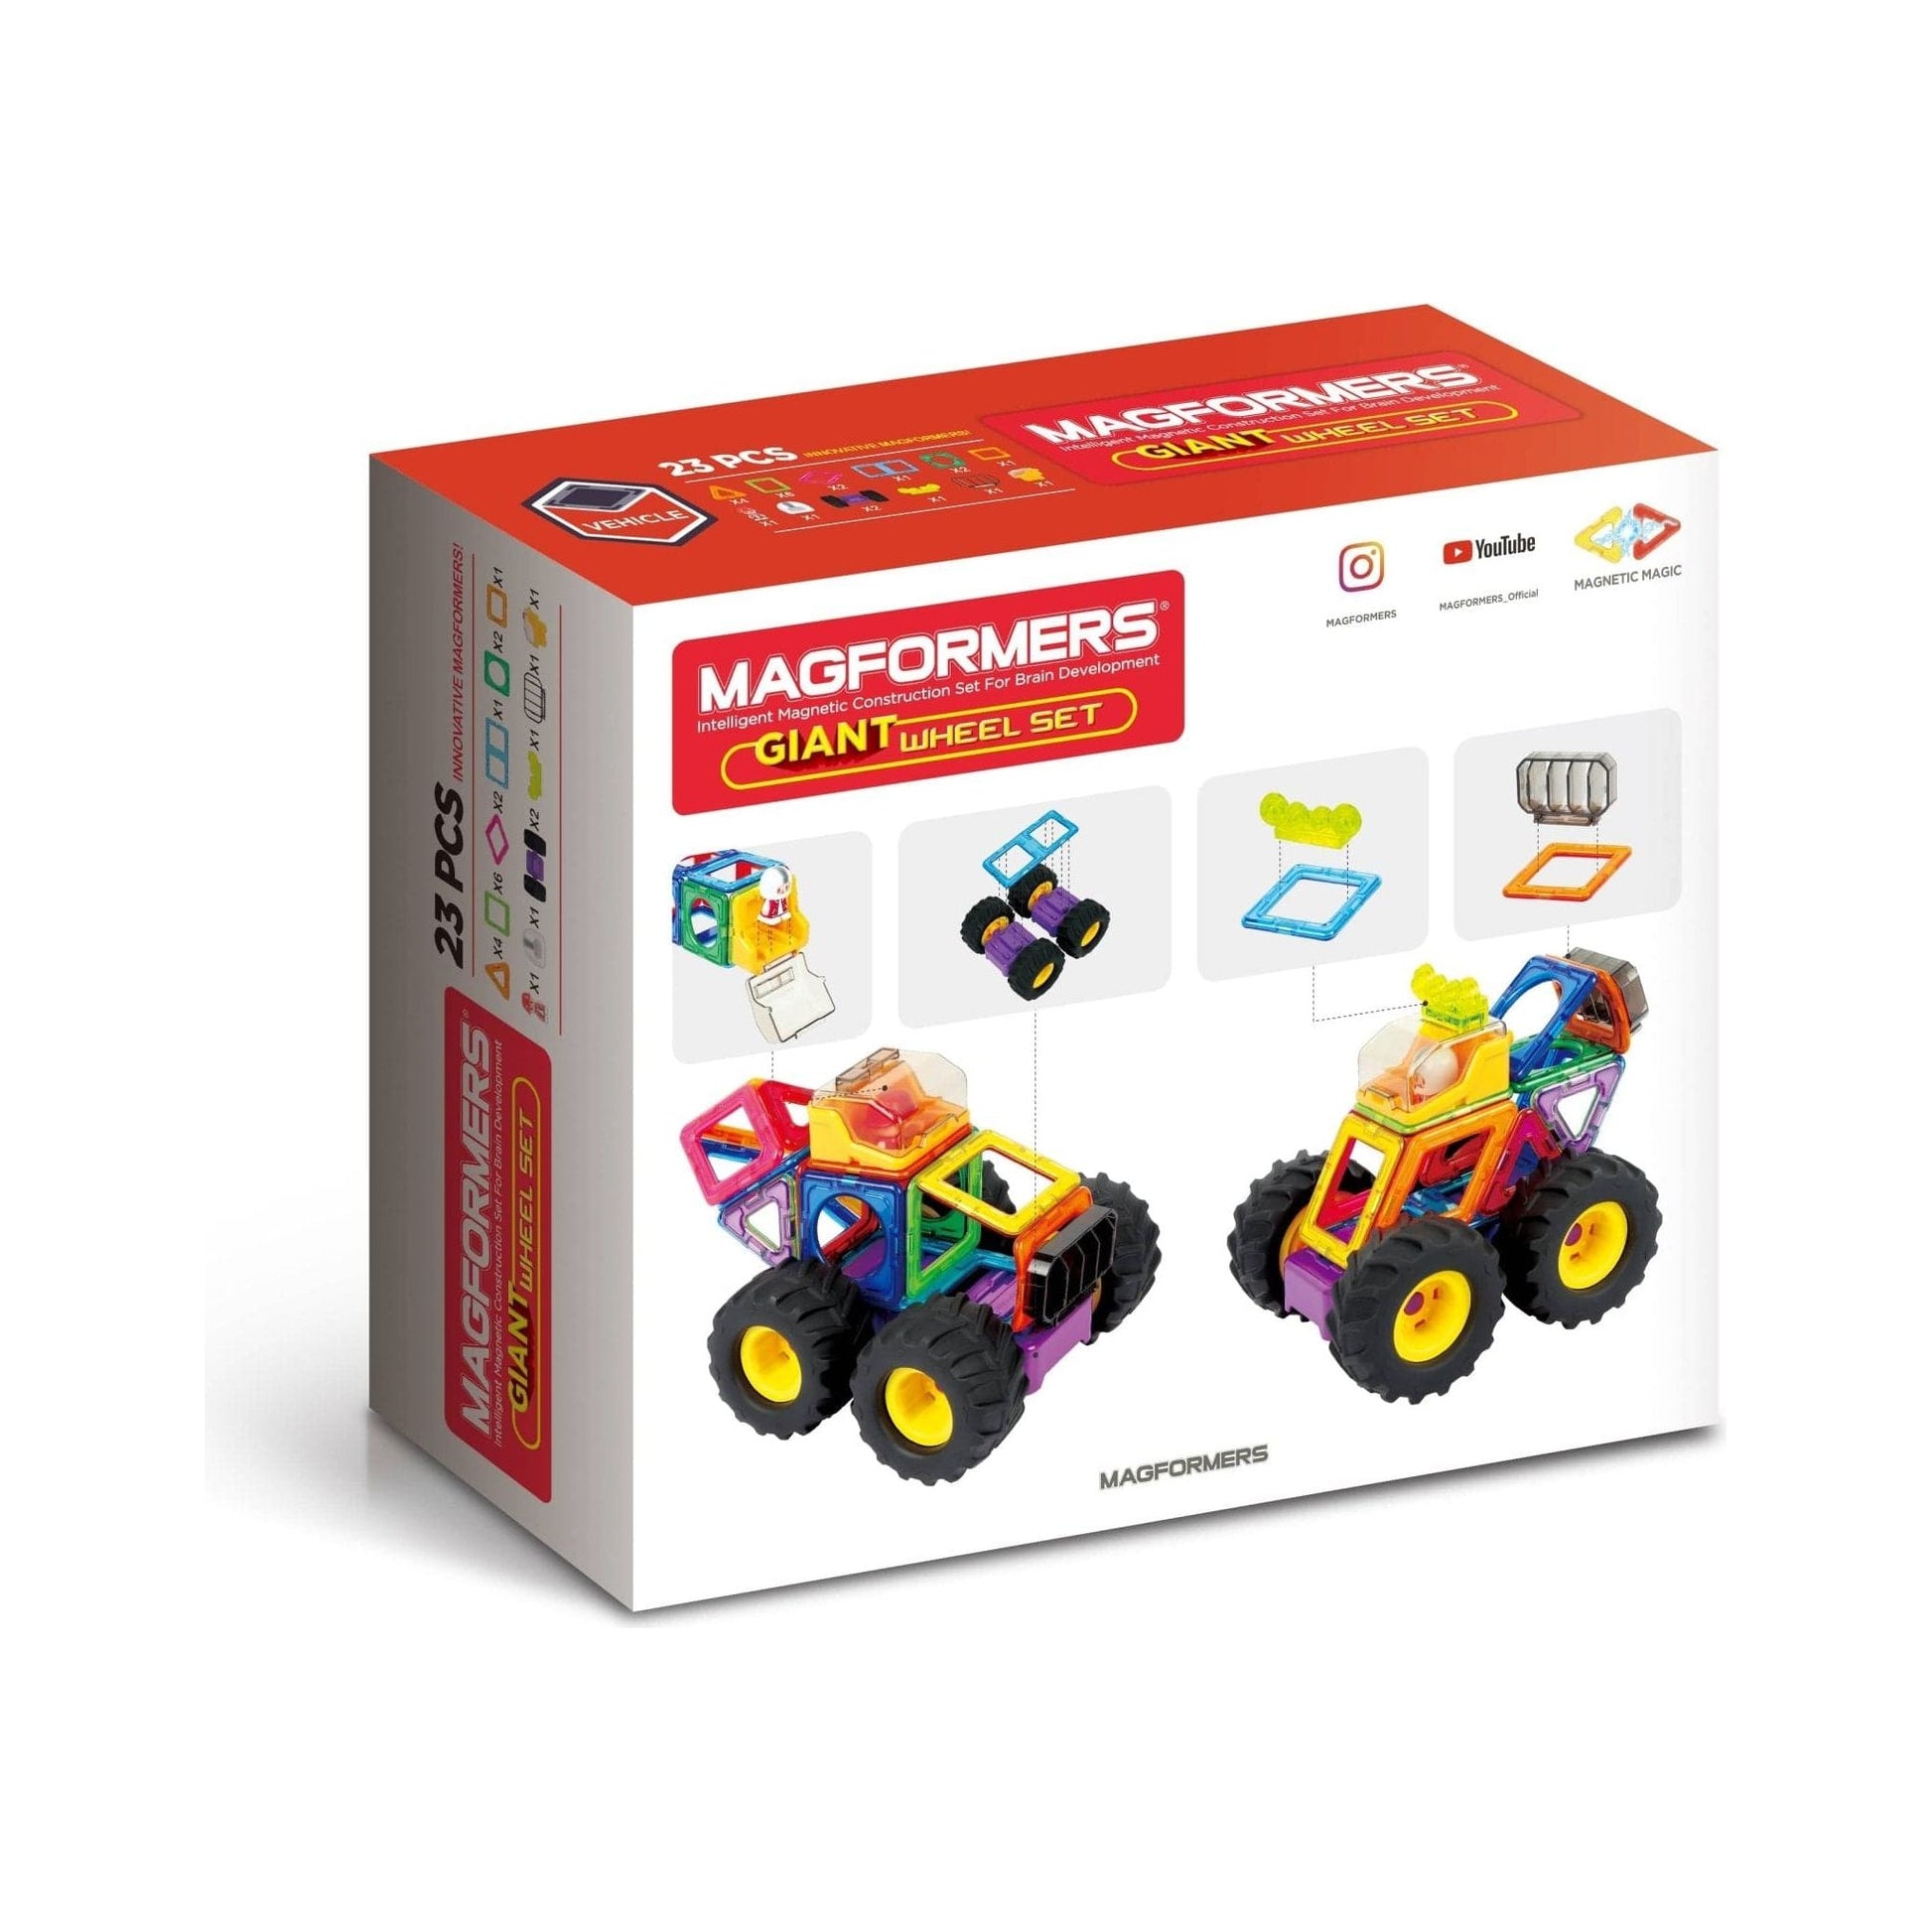 Magformers Construction Toy Giant Wheel Set back of box